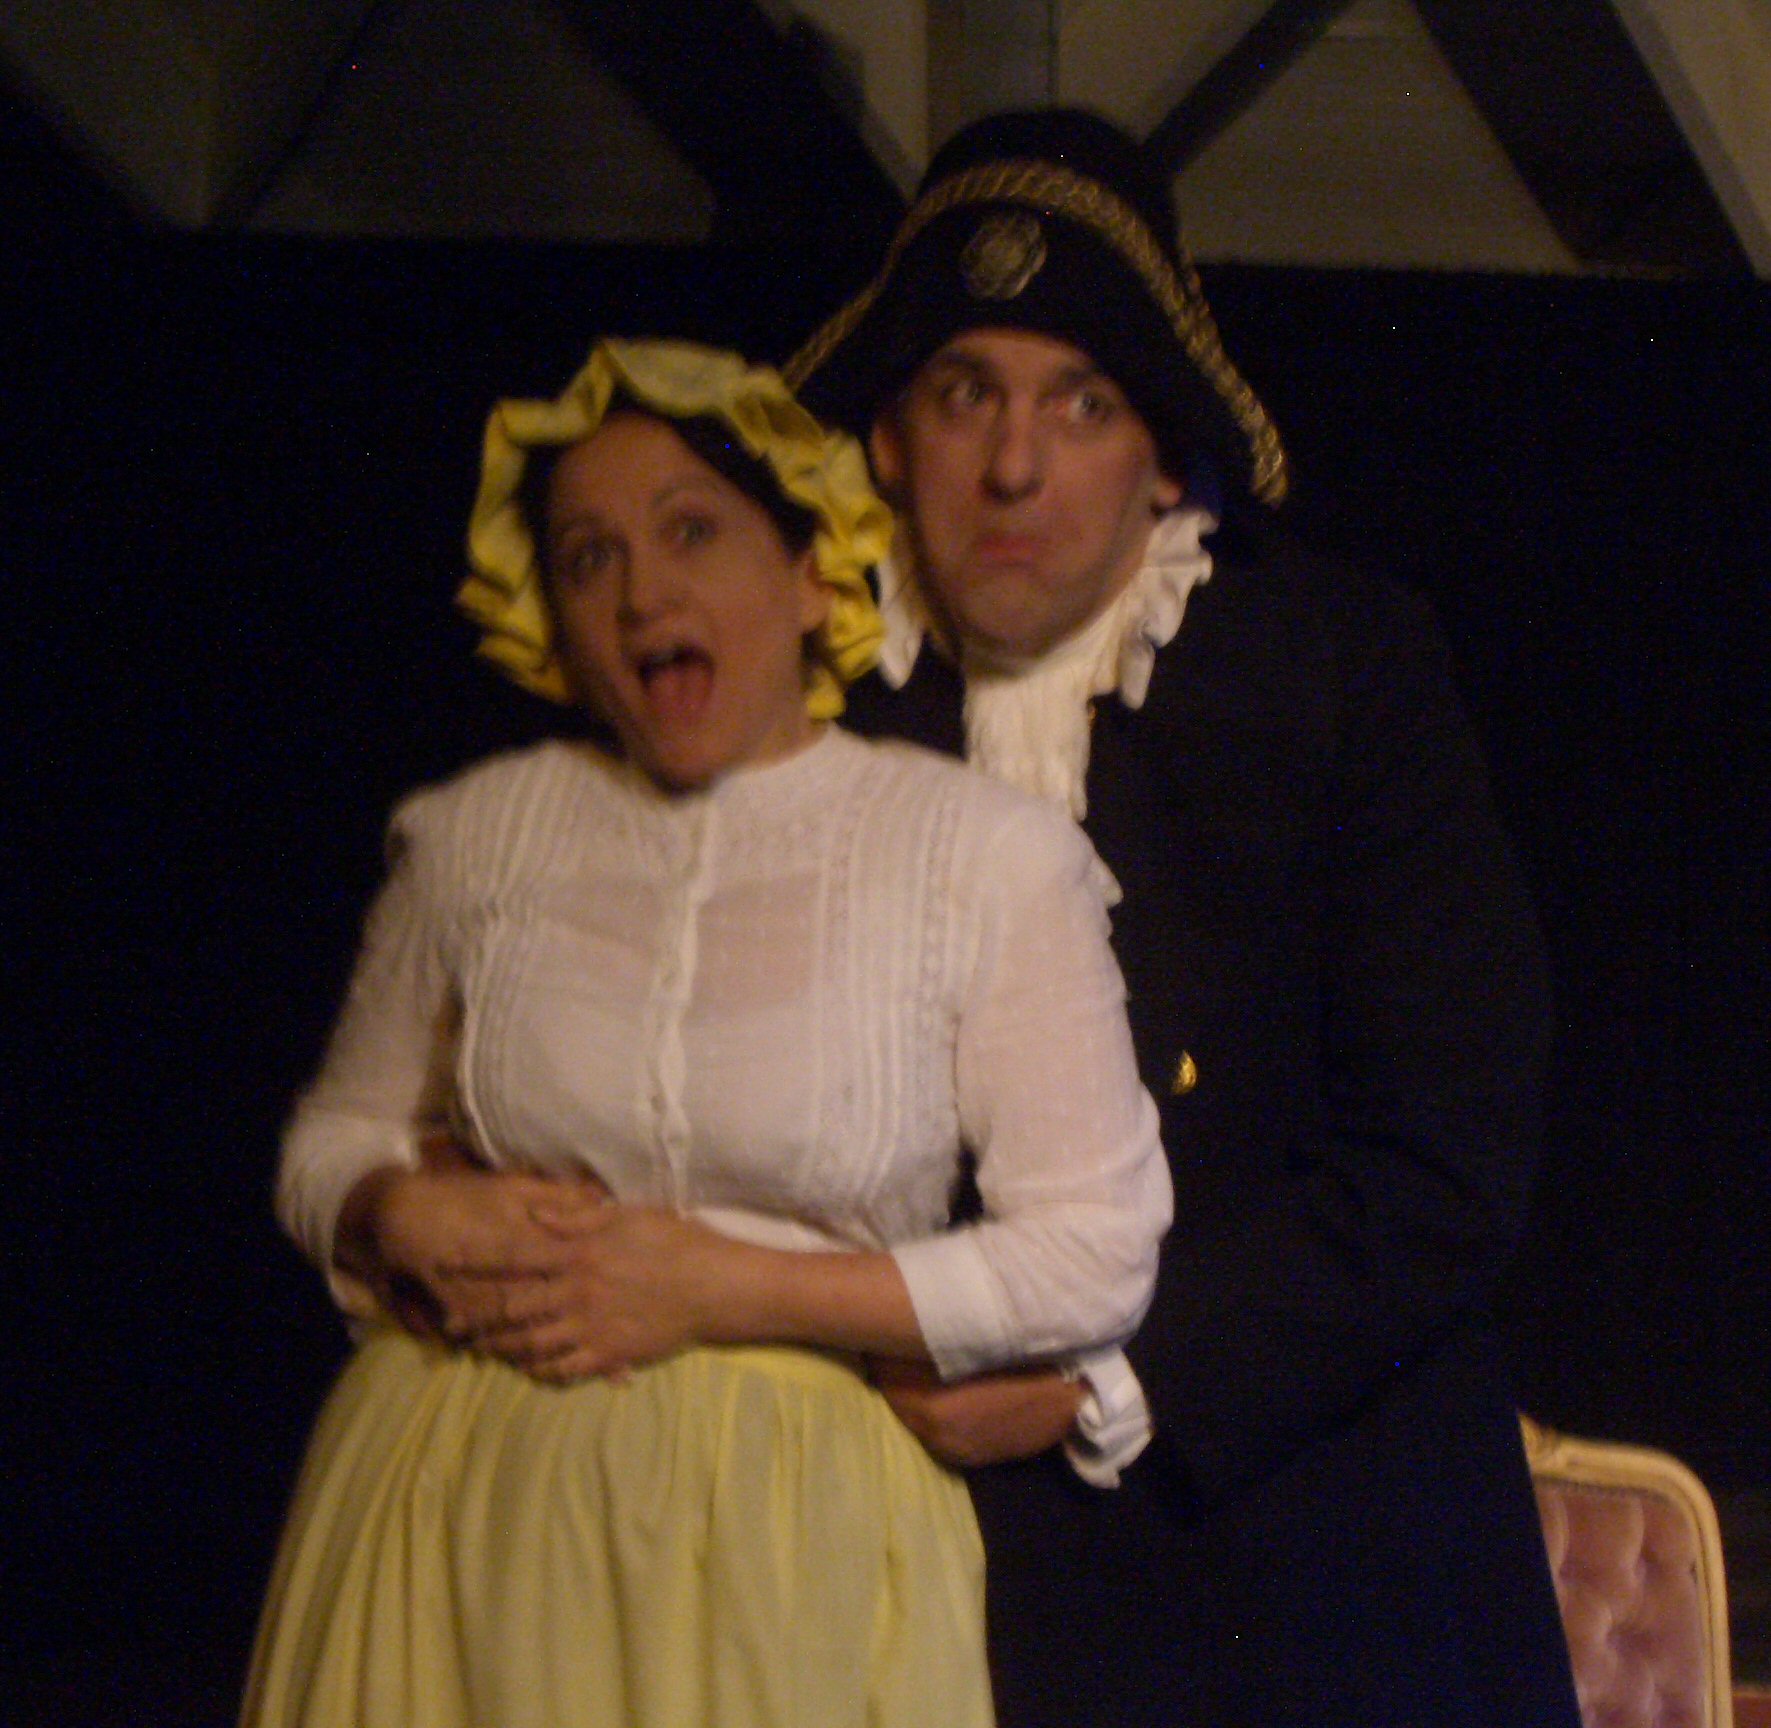 as Widow Corney with Dean Levi as Mr. Bumble, in the stage musical Oliver! in North Hollywood, California 2009